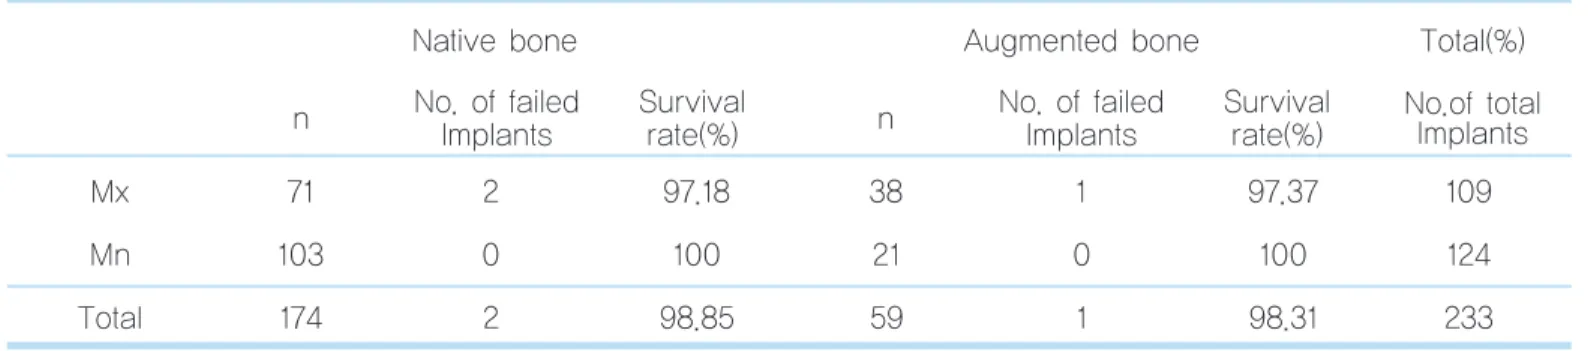 Table 10.  Implant survival rate of native bone &amp; augmented bone